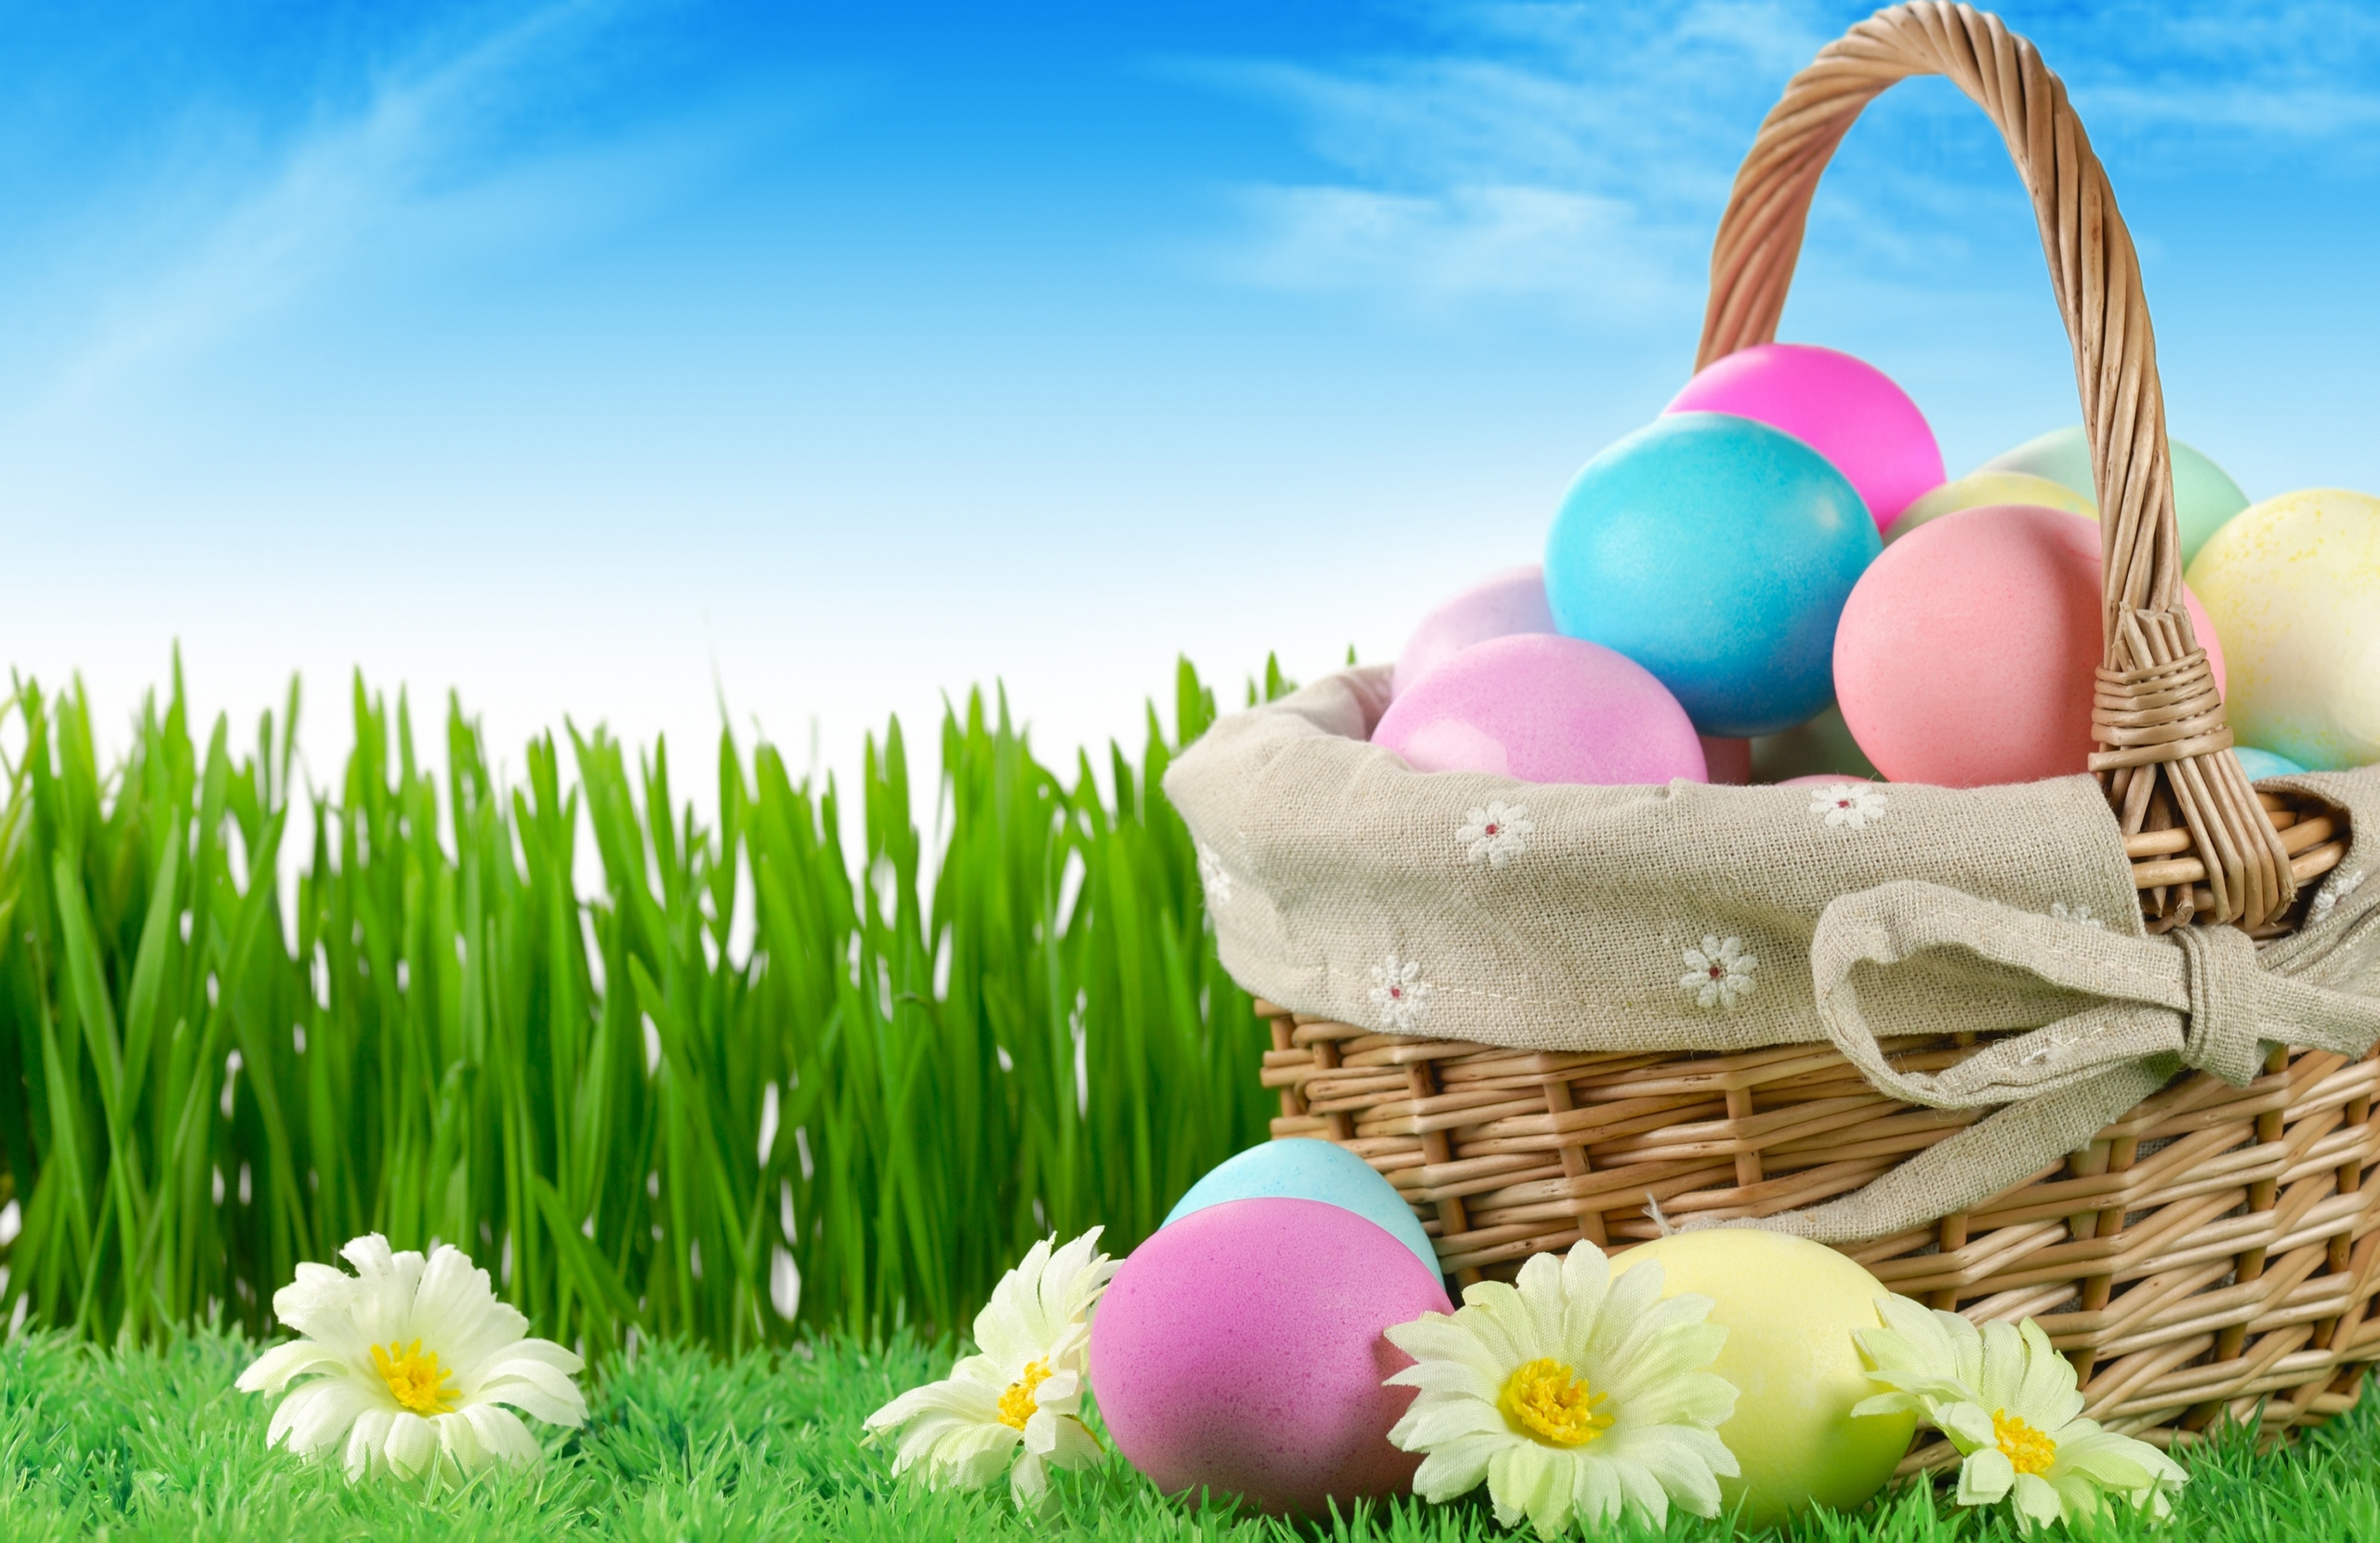 Easter Backgrounds collection download free